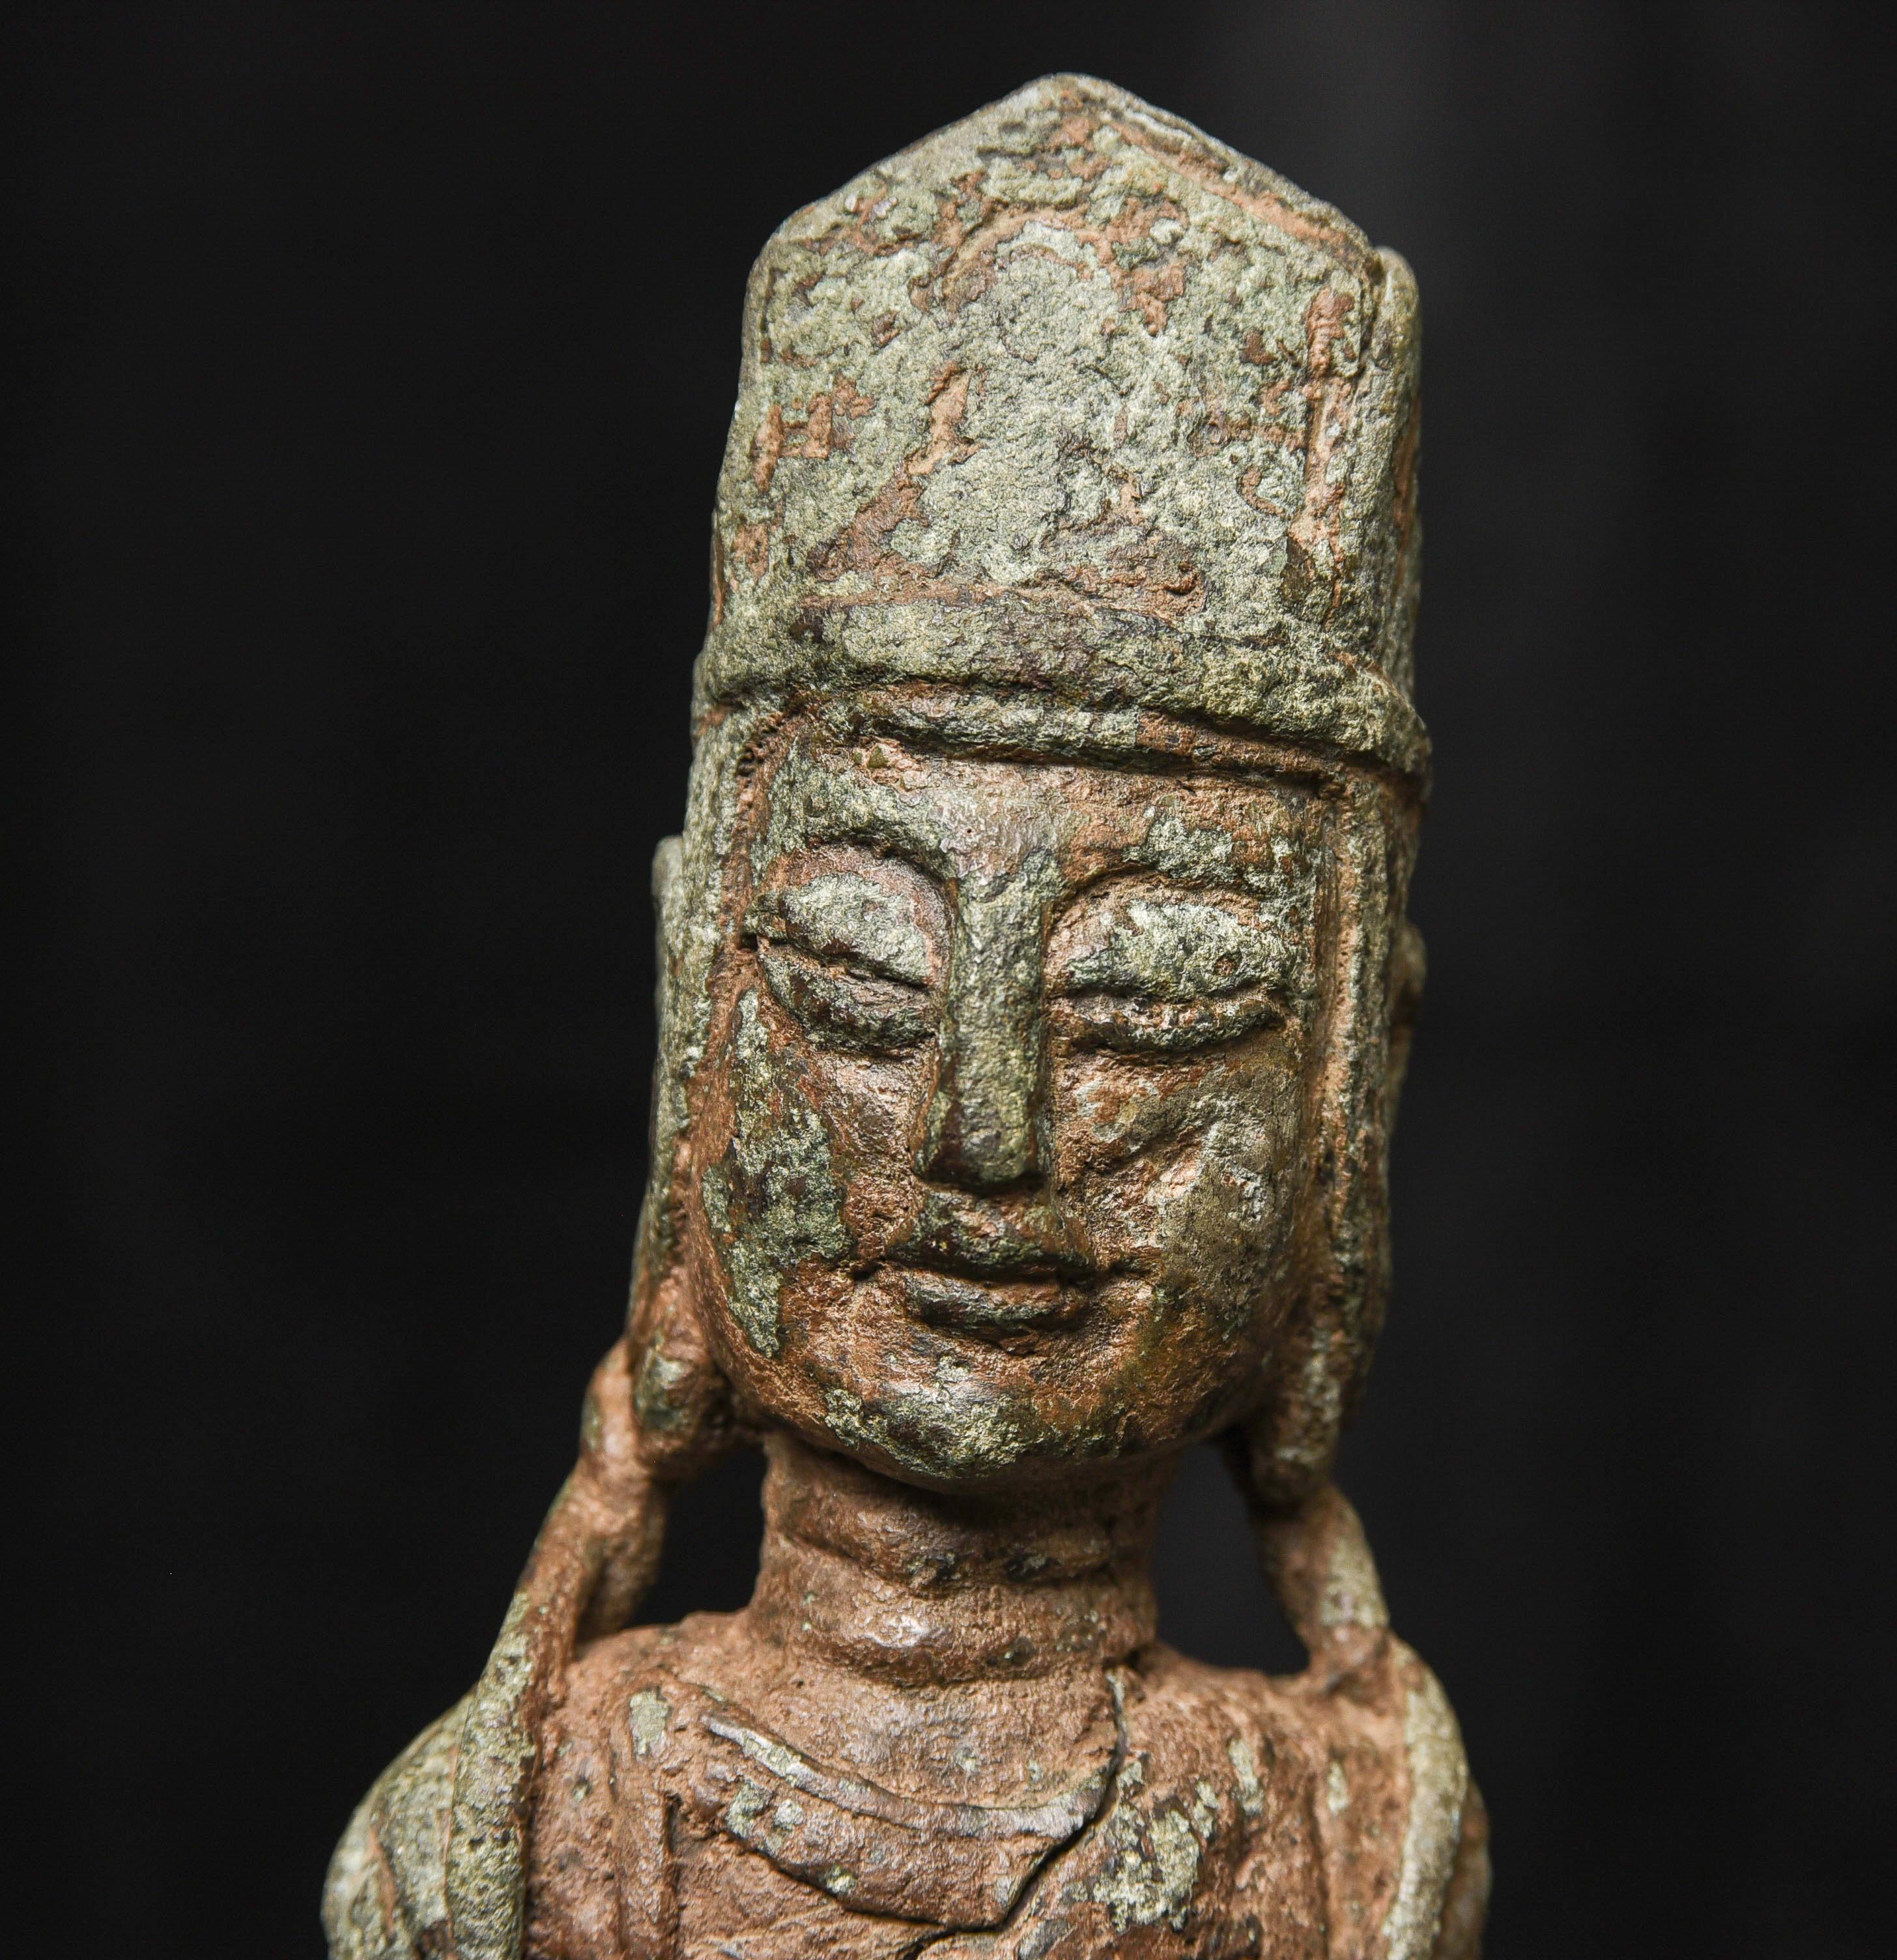 Early Chinese/Silk Road, Bronze Buddha/Bodhisattva Bust-Possibly 10thC or e 9687 For Sale 2